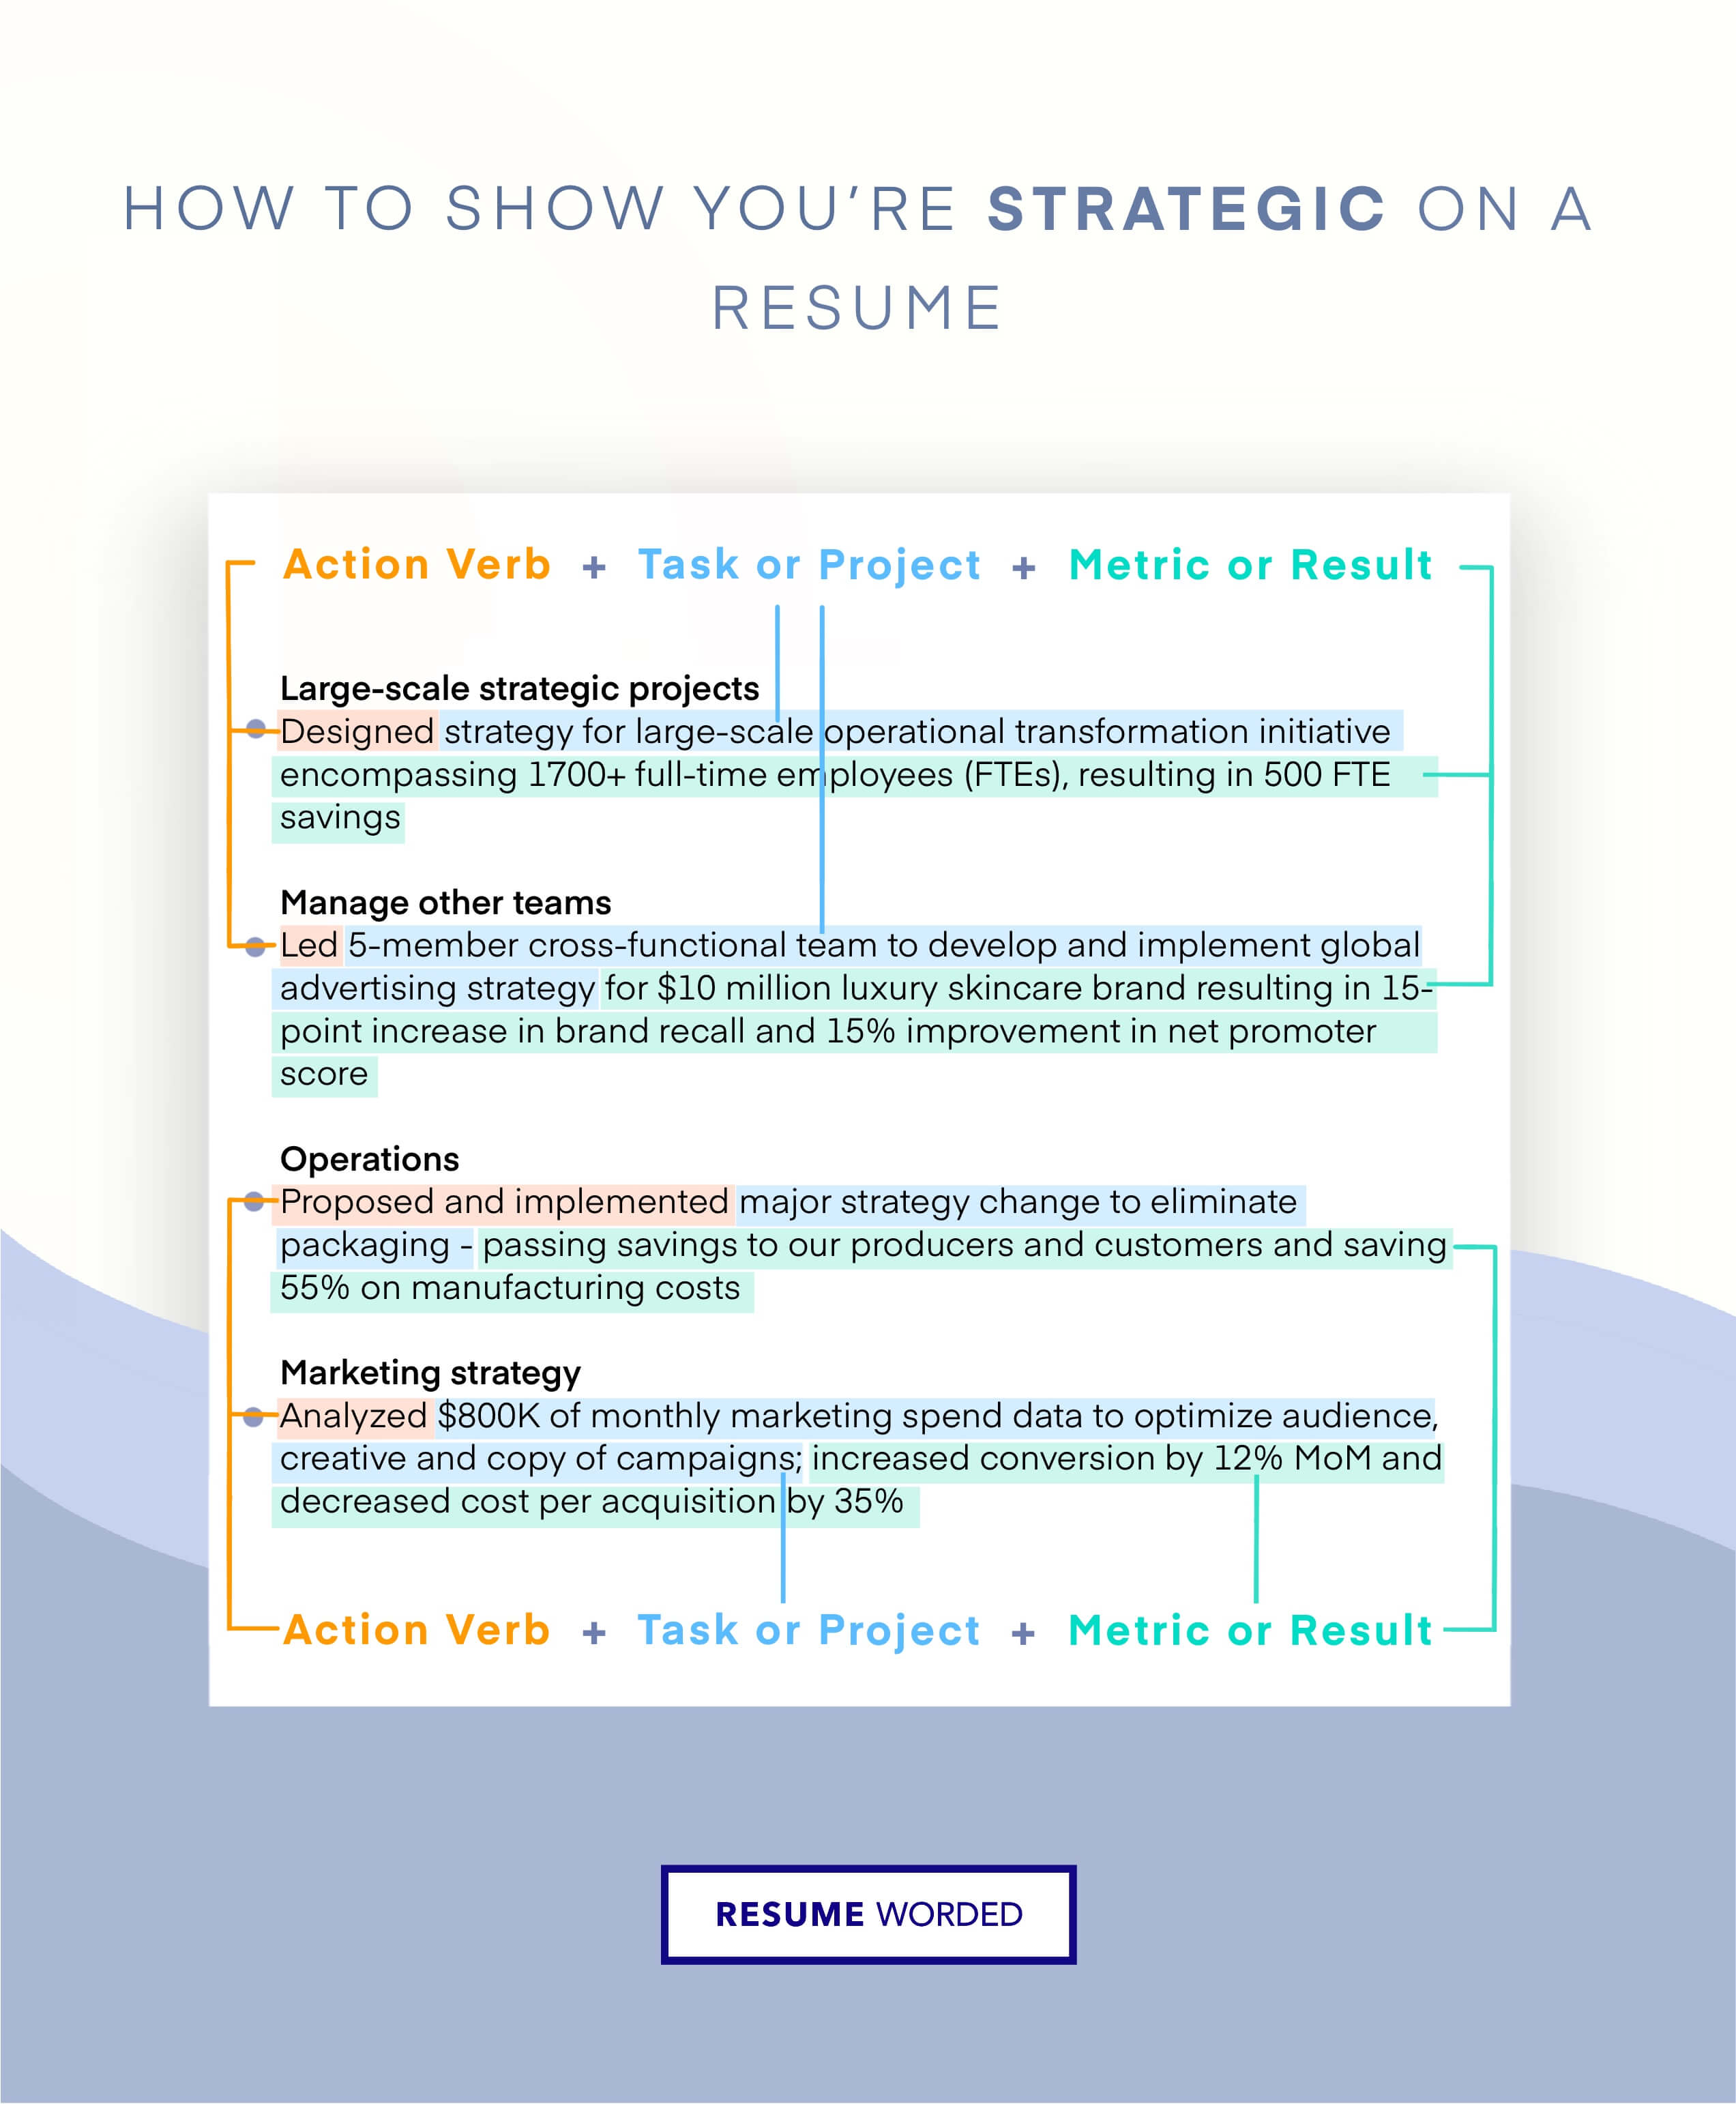 Demonstrate your leadership and strategic thinking -  Director of Marketing CV